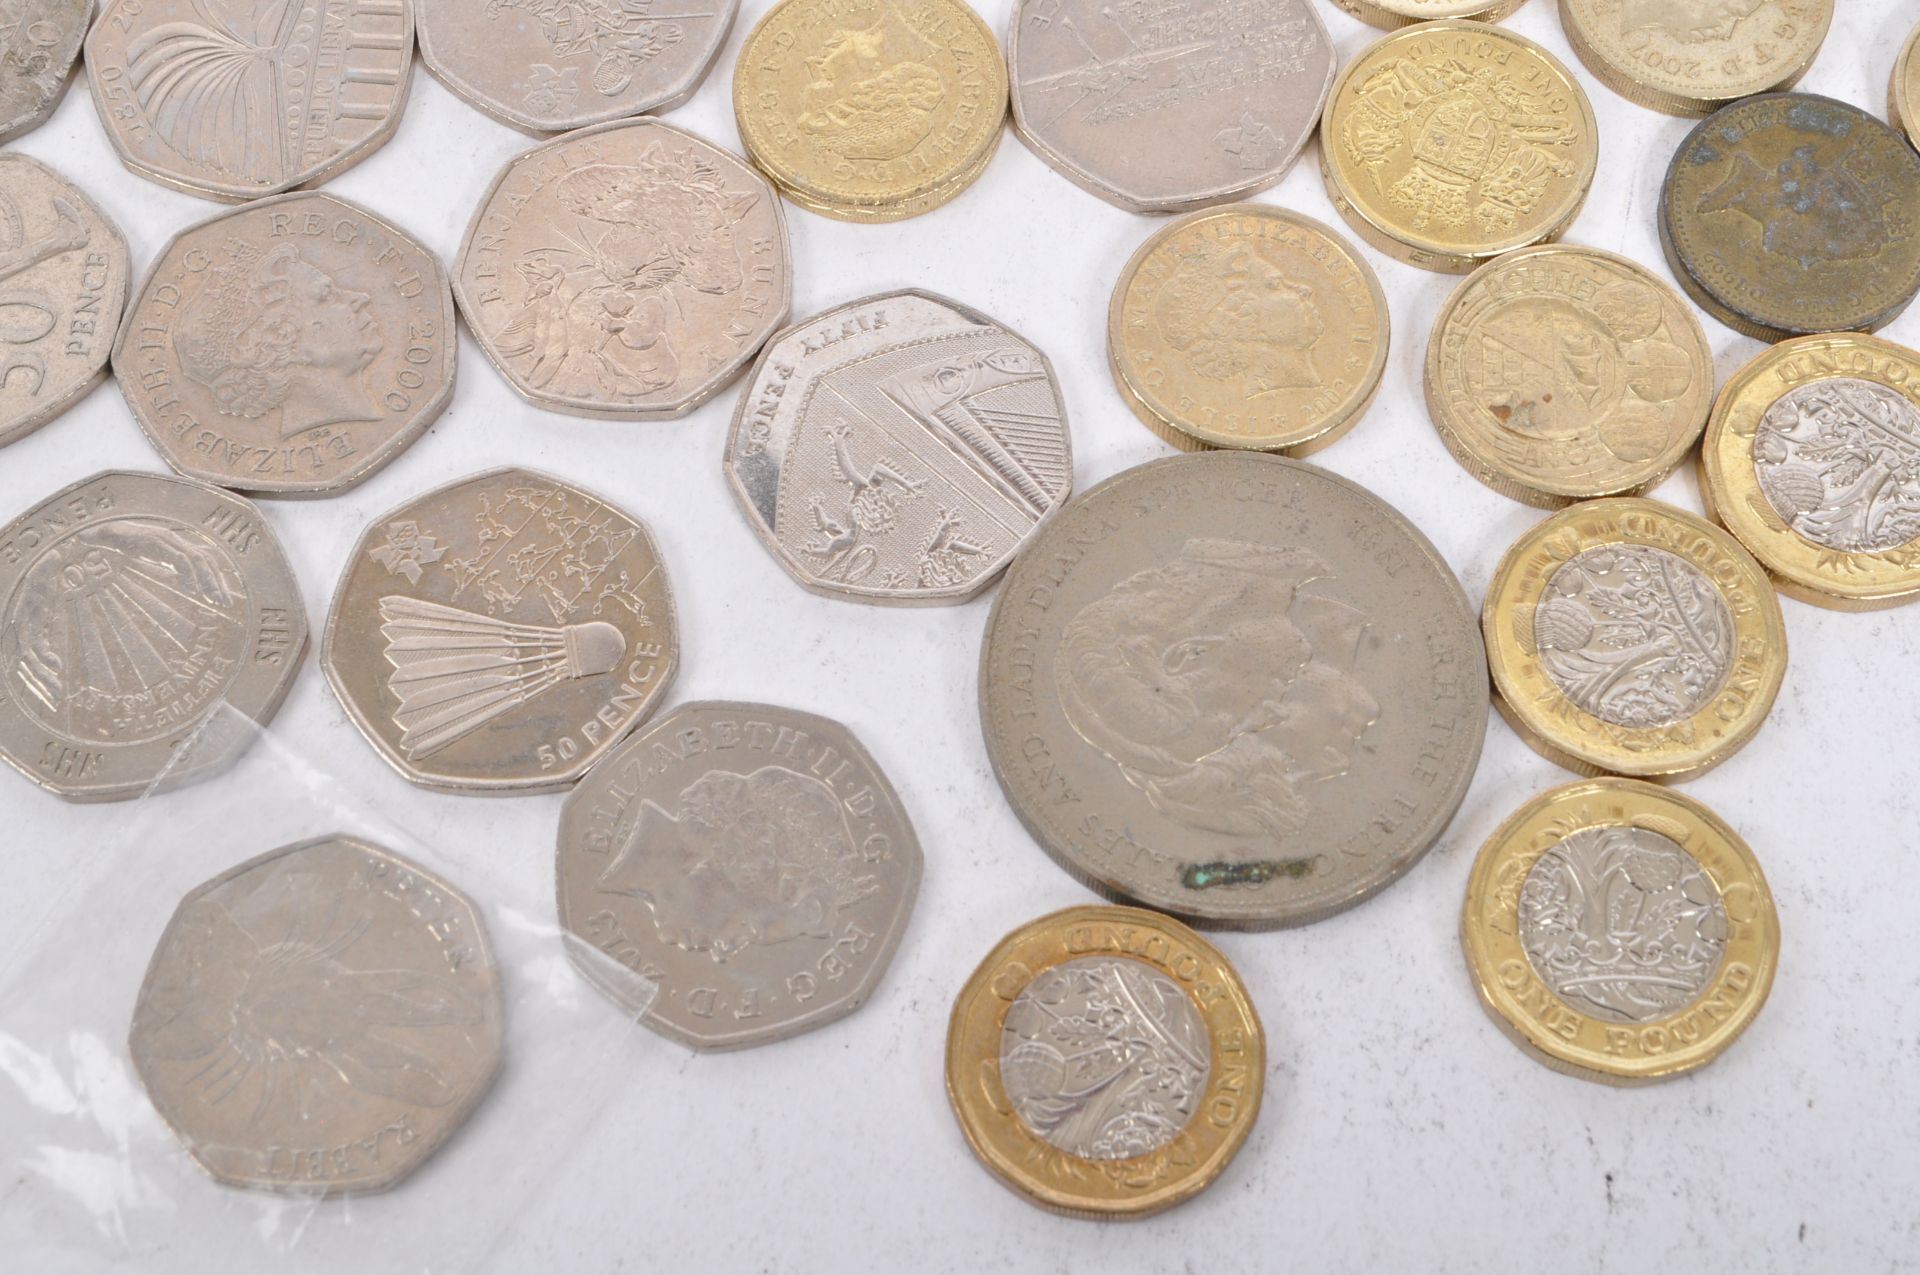 COLLETION OF UNITED KINGDOM CIRCULATED CURRENCY COINAGE - Image 2 of 9